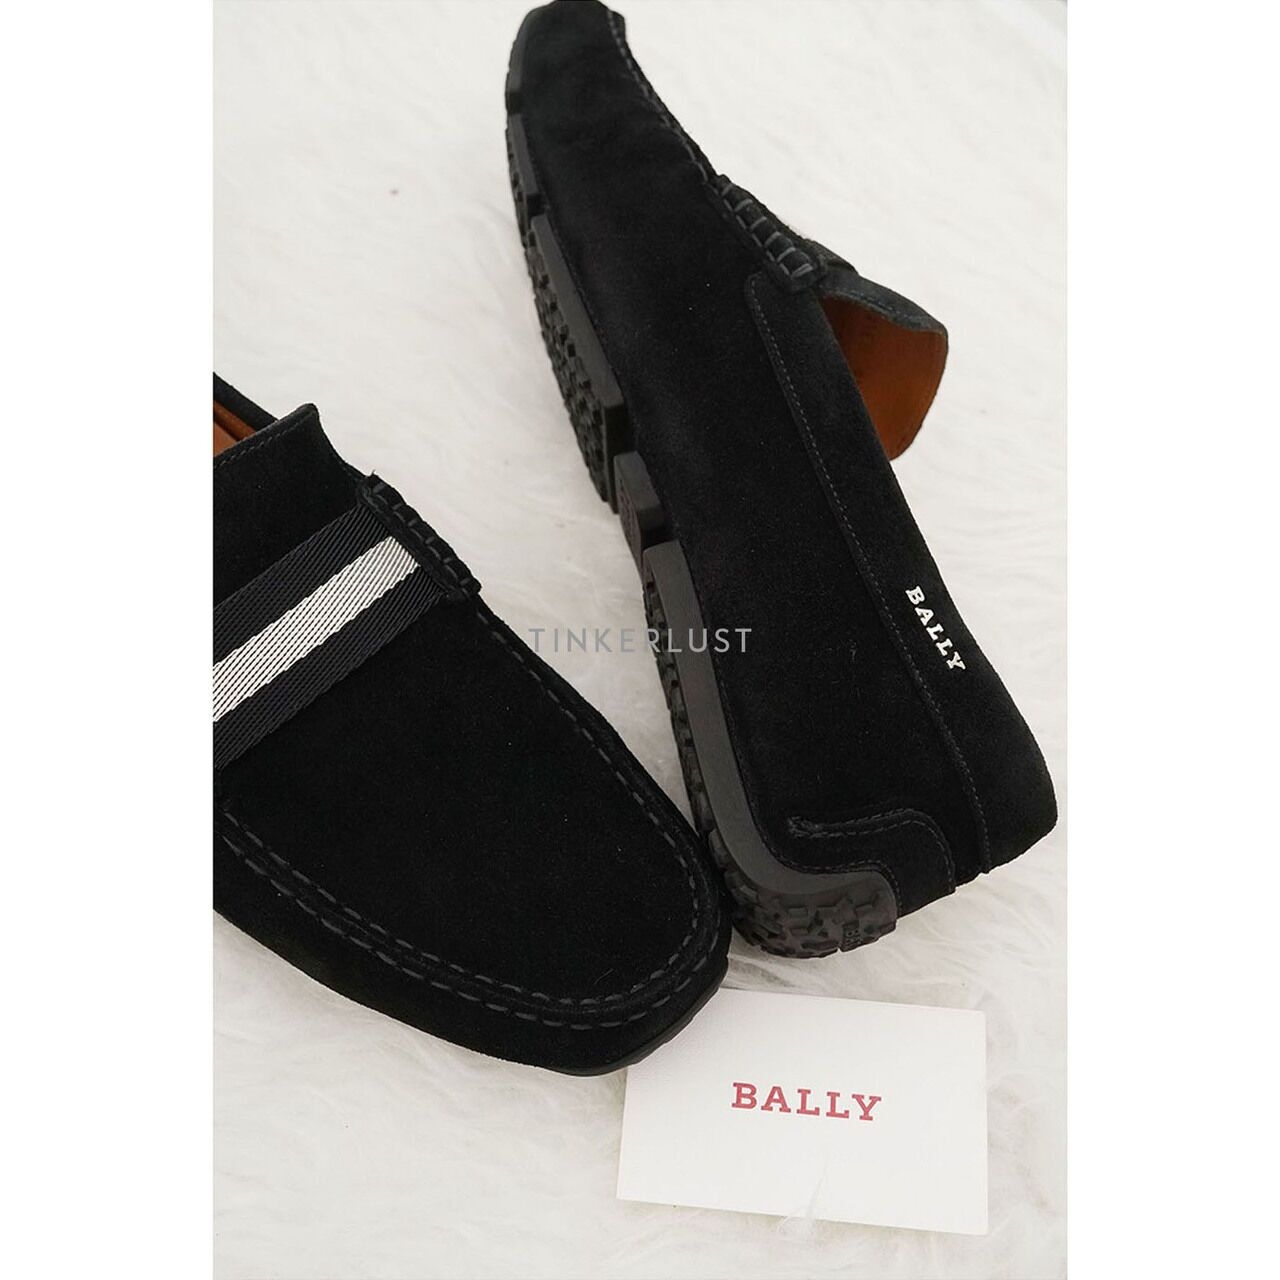 Bally Men Driver Pearce Loafers in Black Suede with Trainspotting Stripe